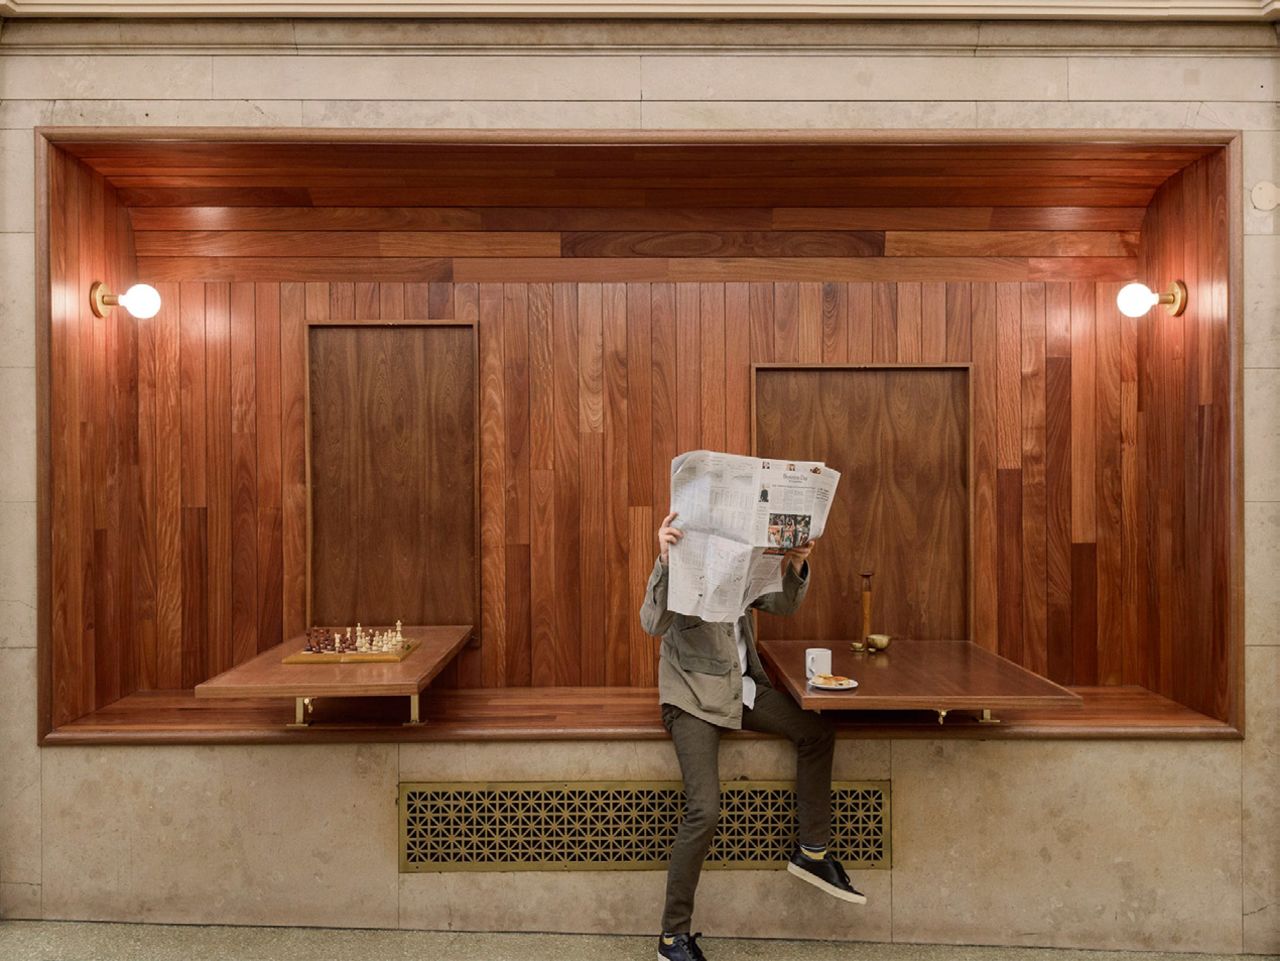 The Tribeca bakery is housed in an unconventional spot within an office building lobby. Brooklyn-based design studio Workstead fit the modern bakery into what was previously a long-vacant entryway that had been sealed up after the building's management reoriented its lobby. <br /><br />Design by Workstead, Photos by Matthew Williams from <a href="http://shop.gestalten.com/out-again.html" target="_blank" target="_blank">Let's Go Out Again</a>, Copyright Gestalten 2015